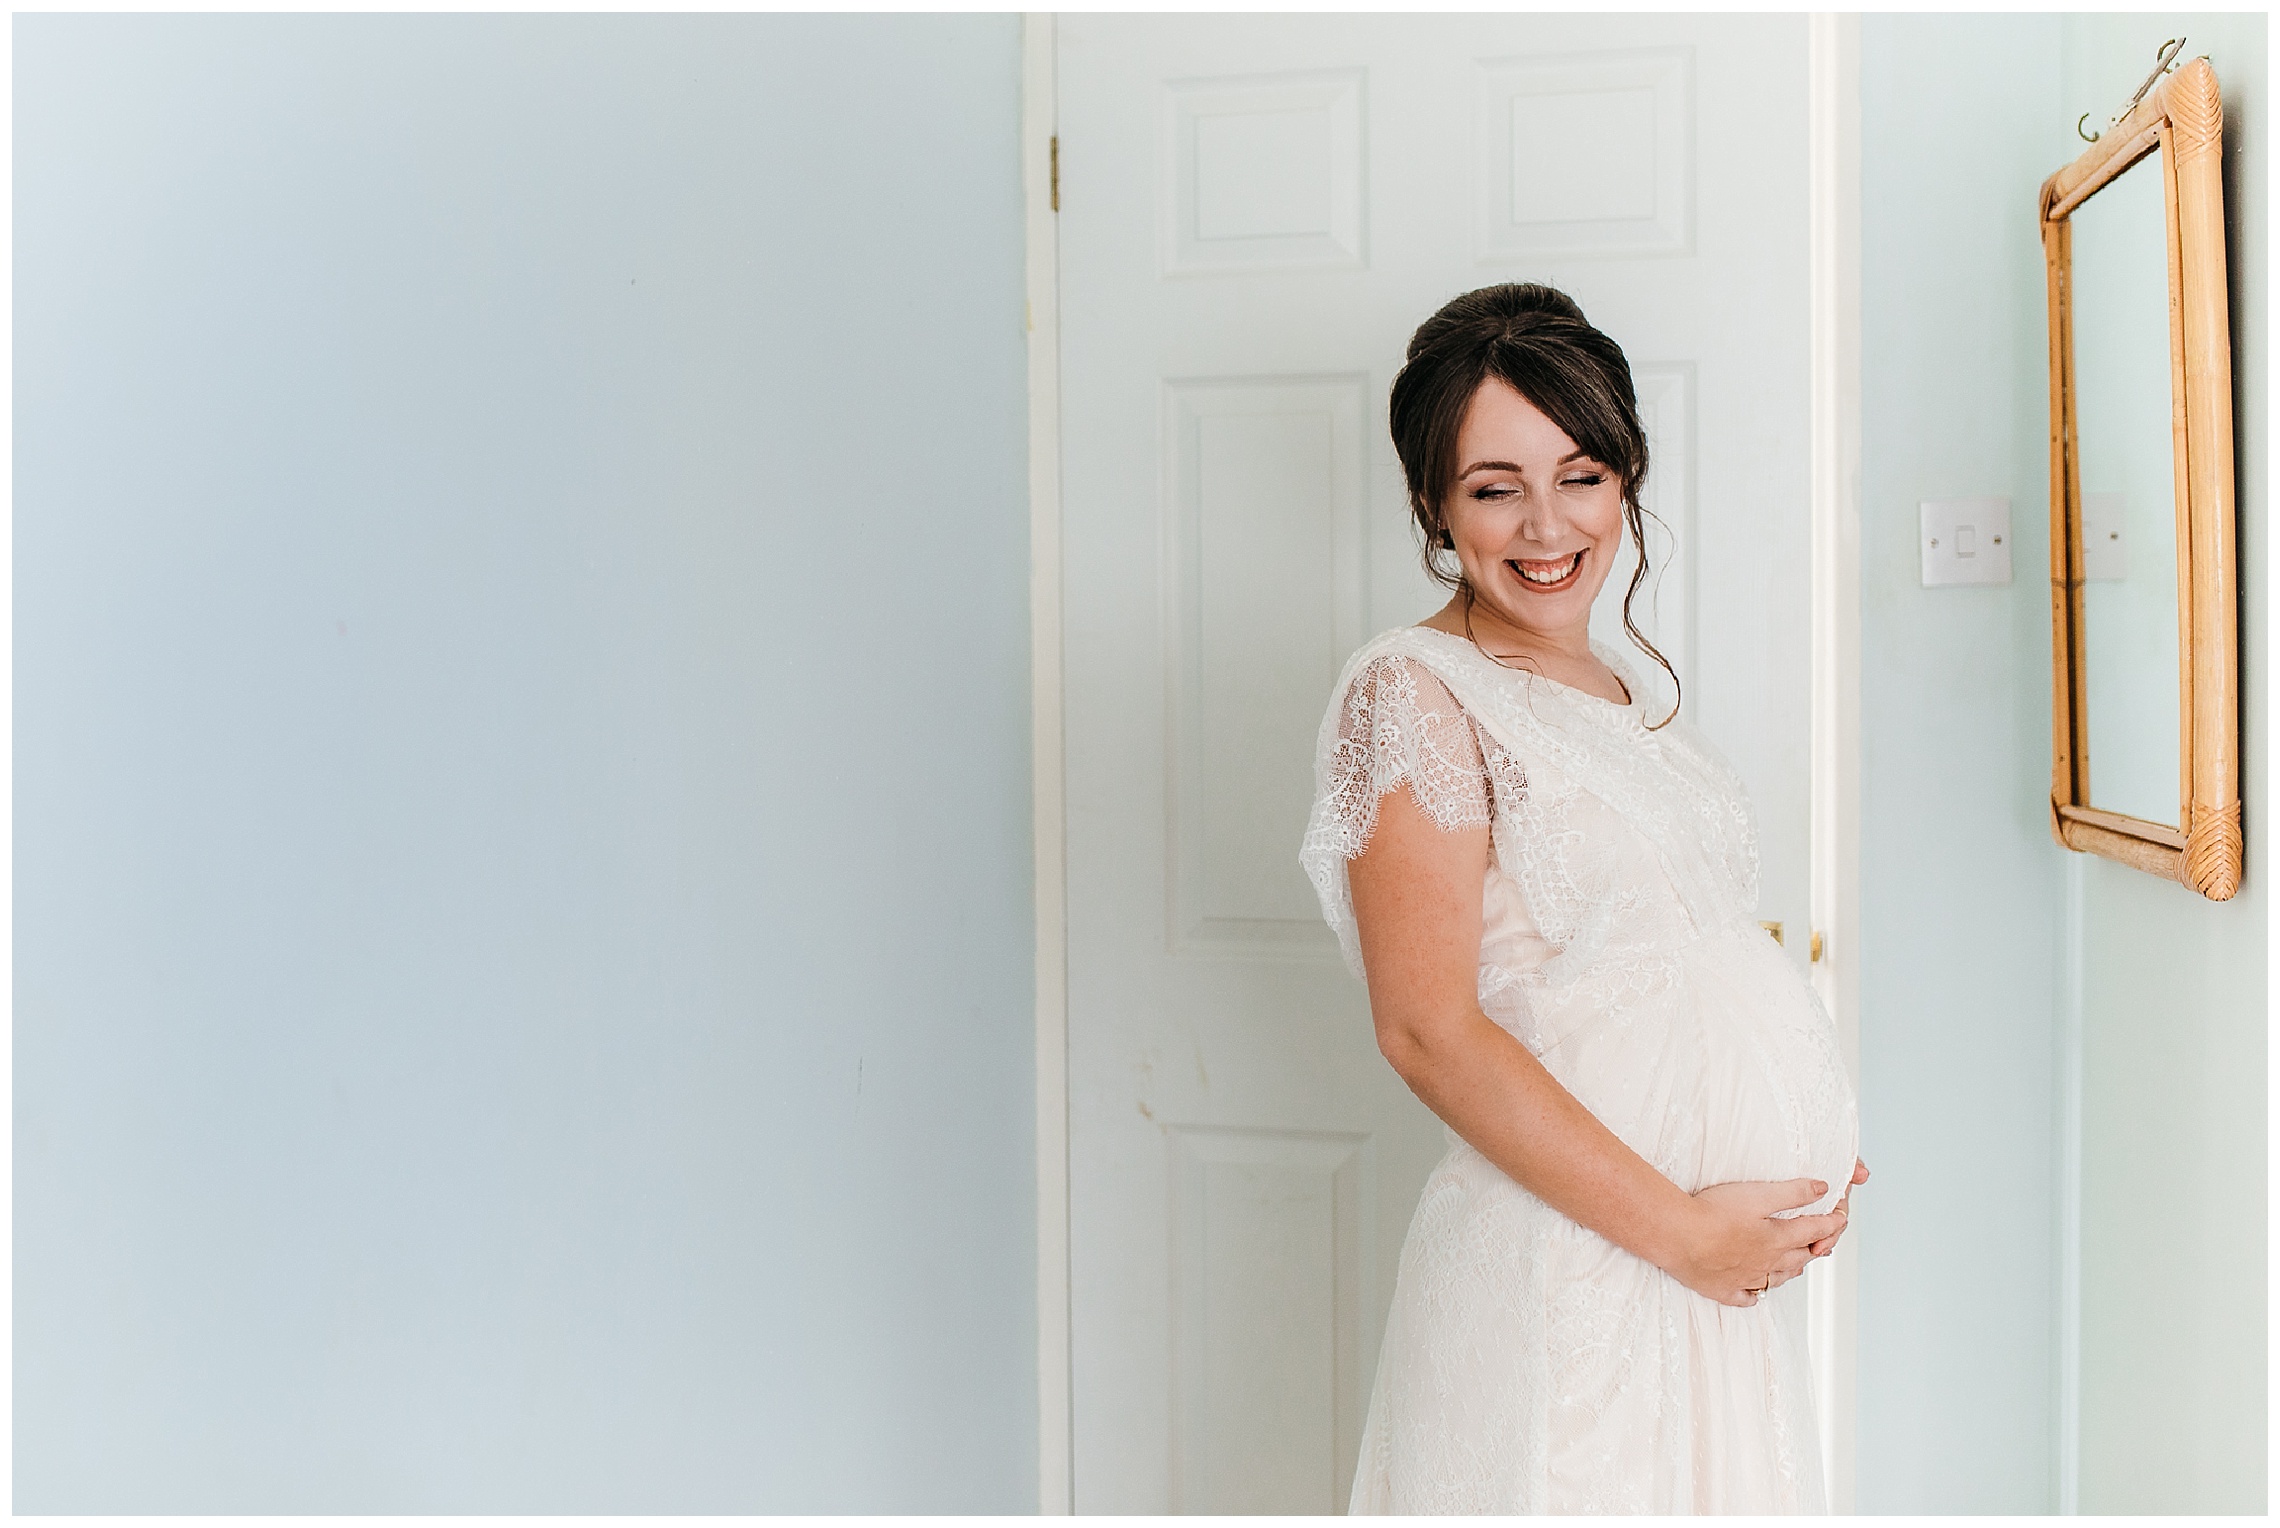 pregnant bride in belle and bunty wedding dress smiles, looks down and holds onto her bump